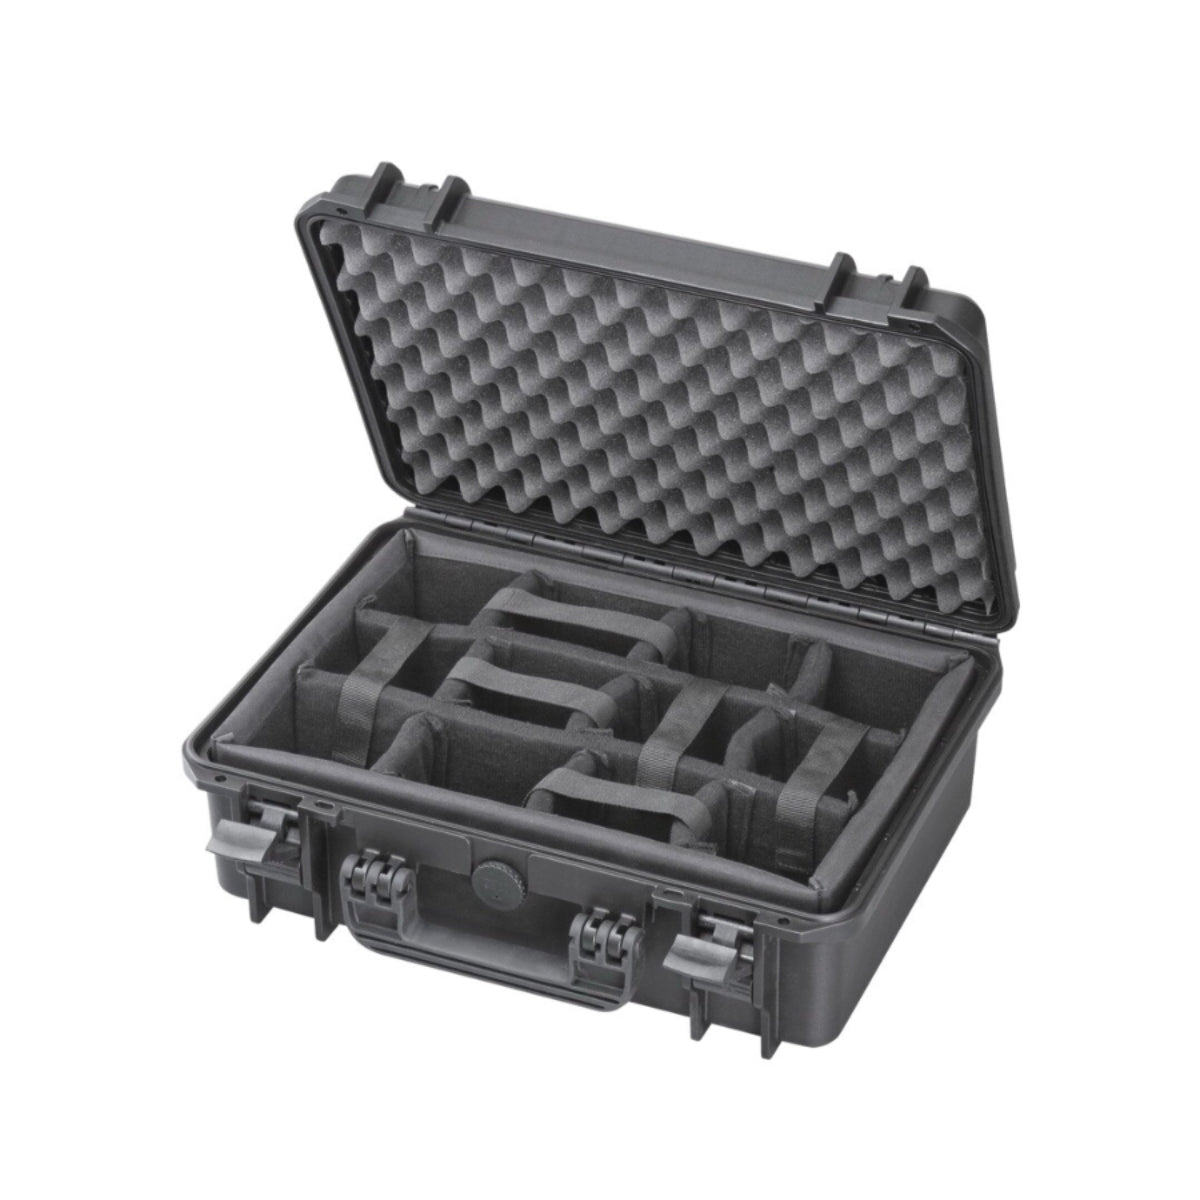 SP PRO 430CAM Black Carry Case, Padded Dividers, ID: L426xW290xH159mm